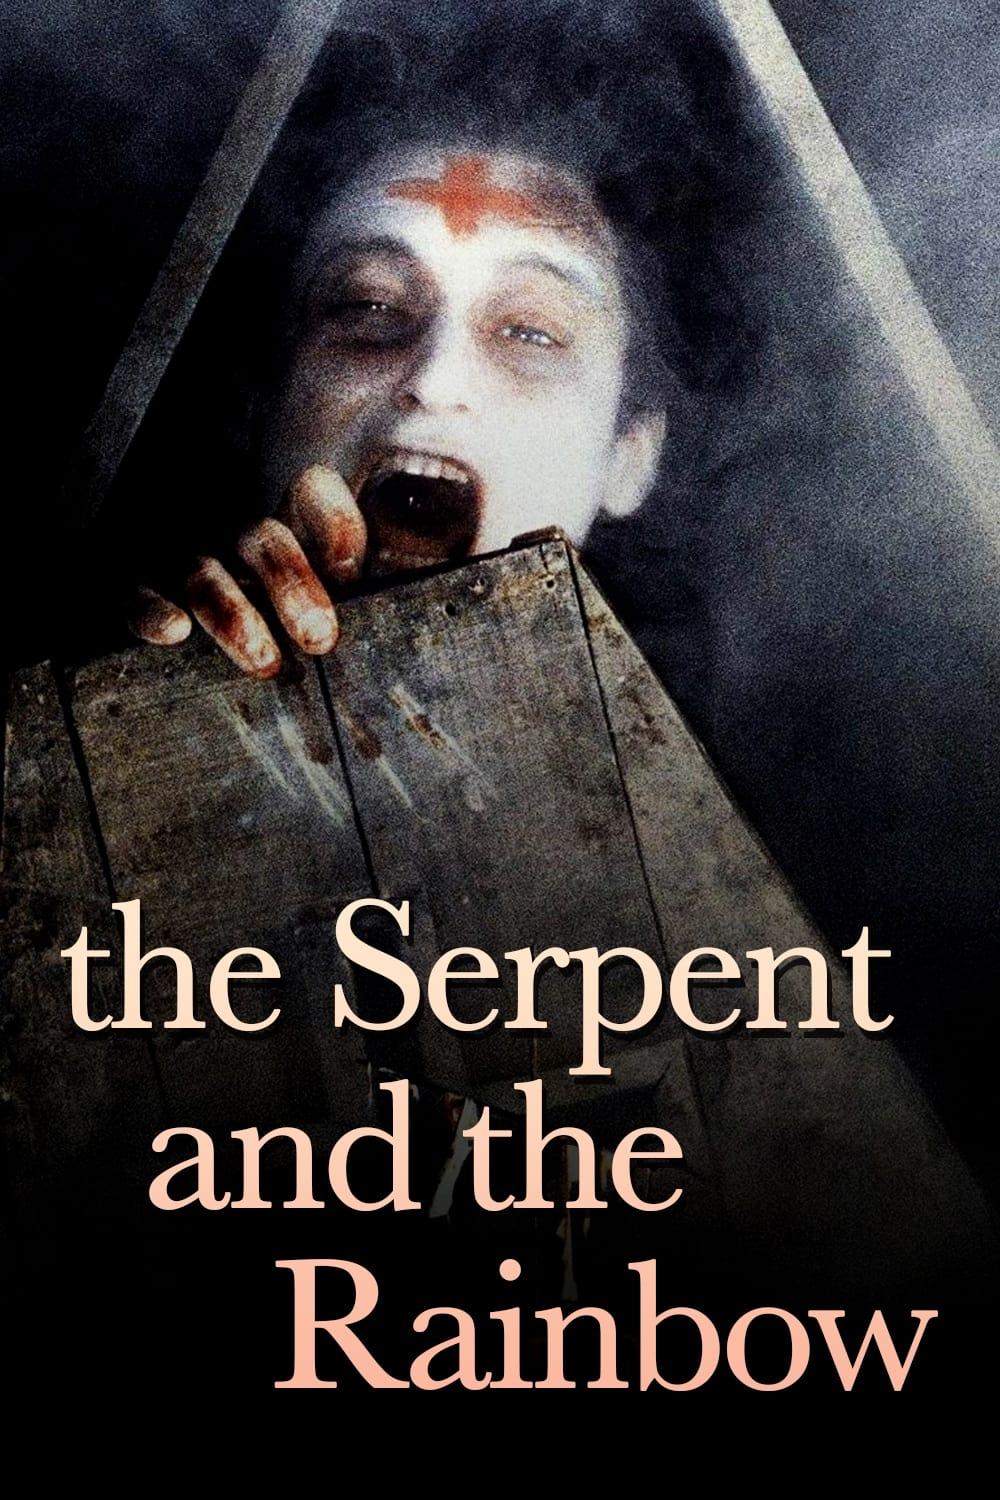 The Serpent and the Rainbow poster